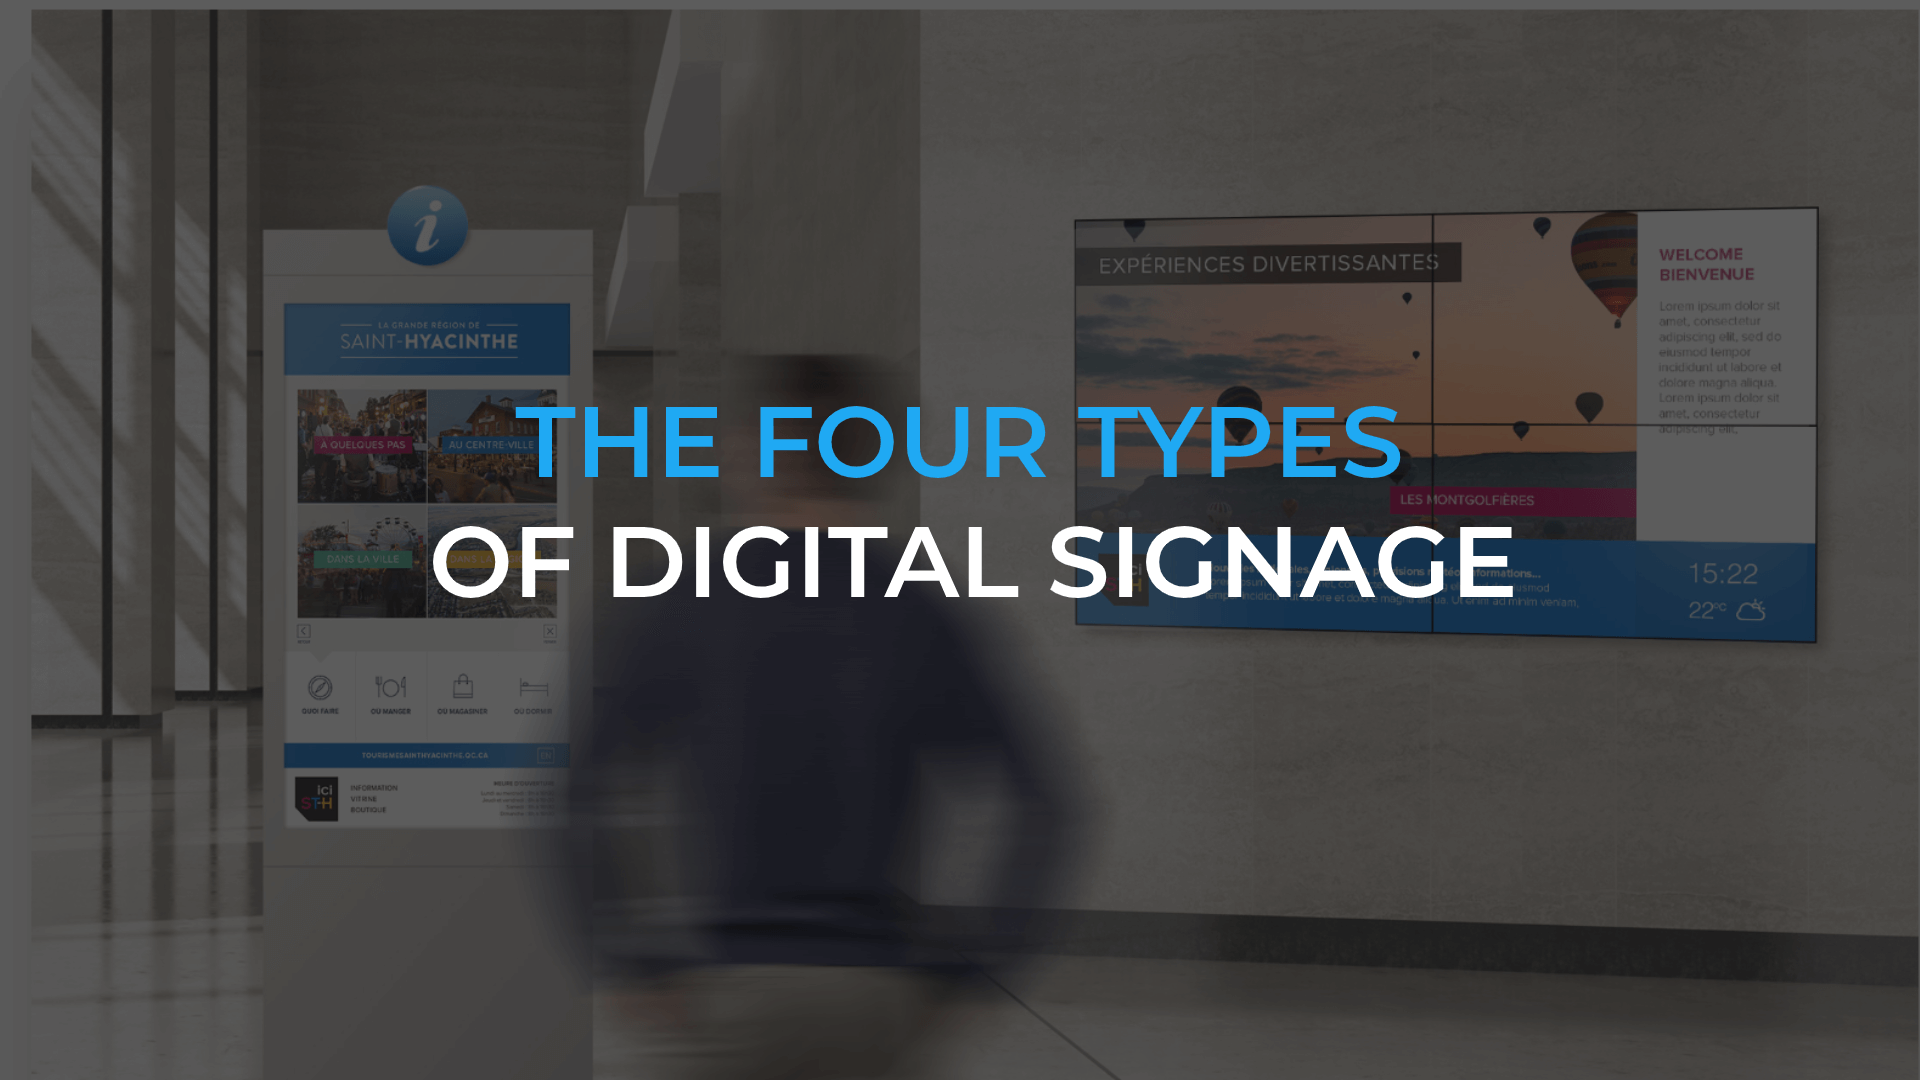 The four types of digital signage